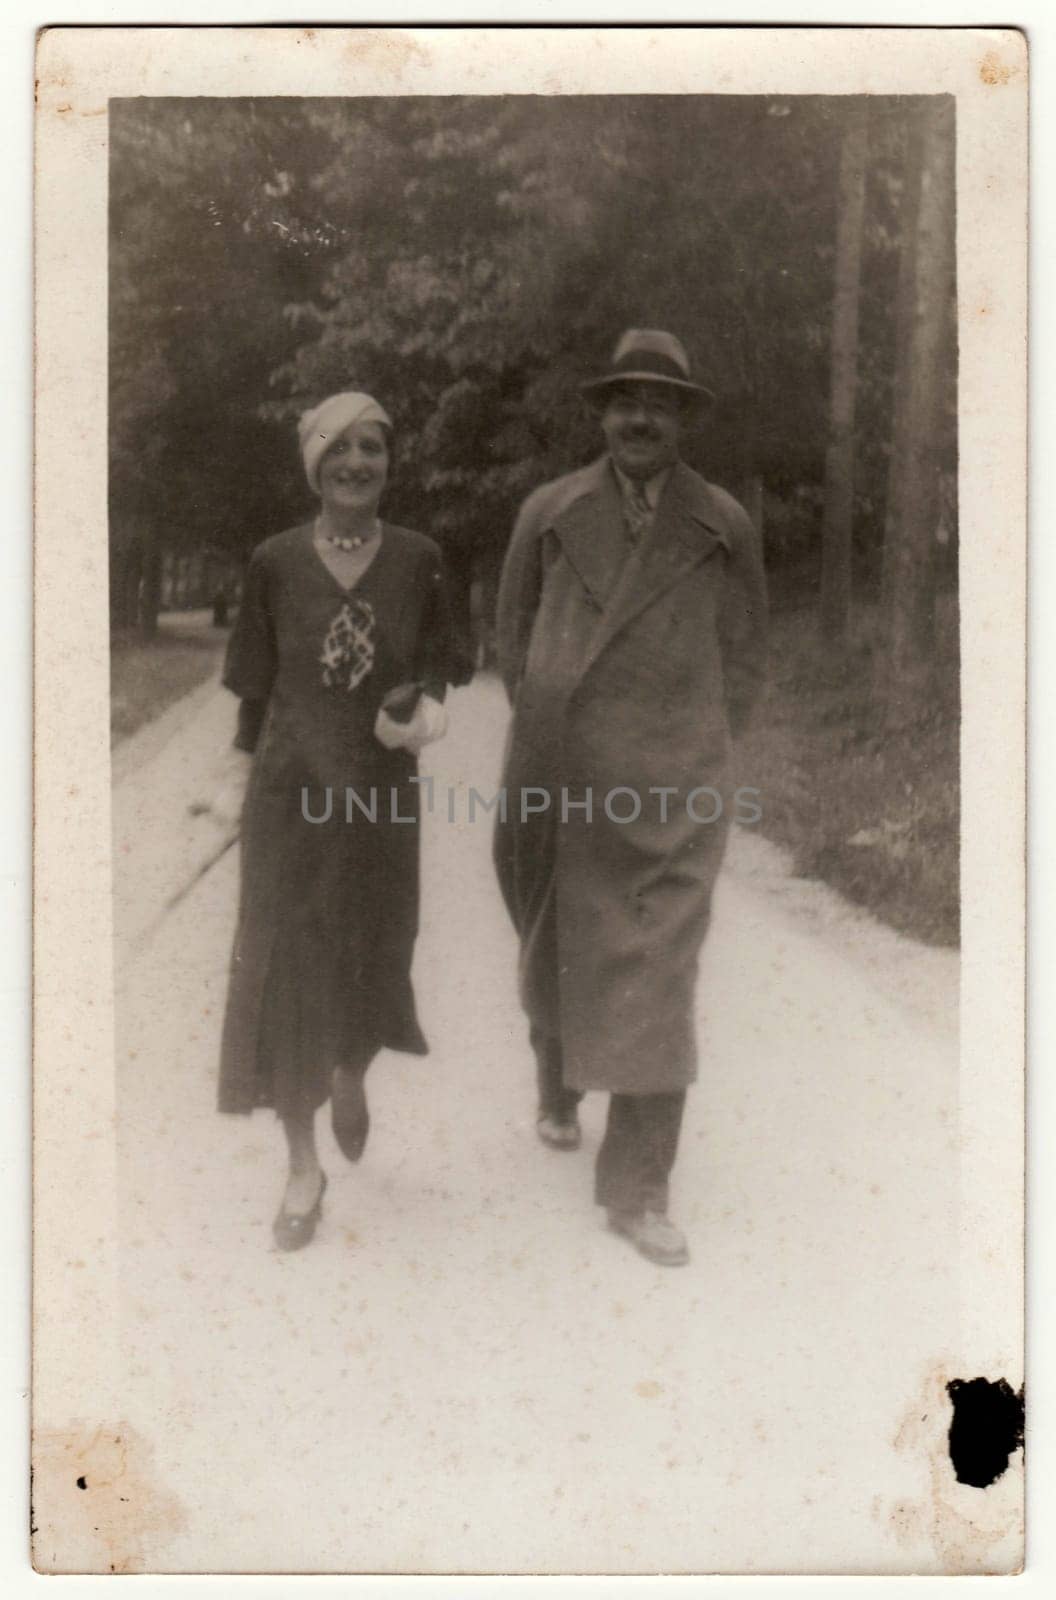 Vintage photo shows woman and man go for a walk. Original retro black and white photography taken from photo album. No postprocess by roman_nerud